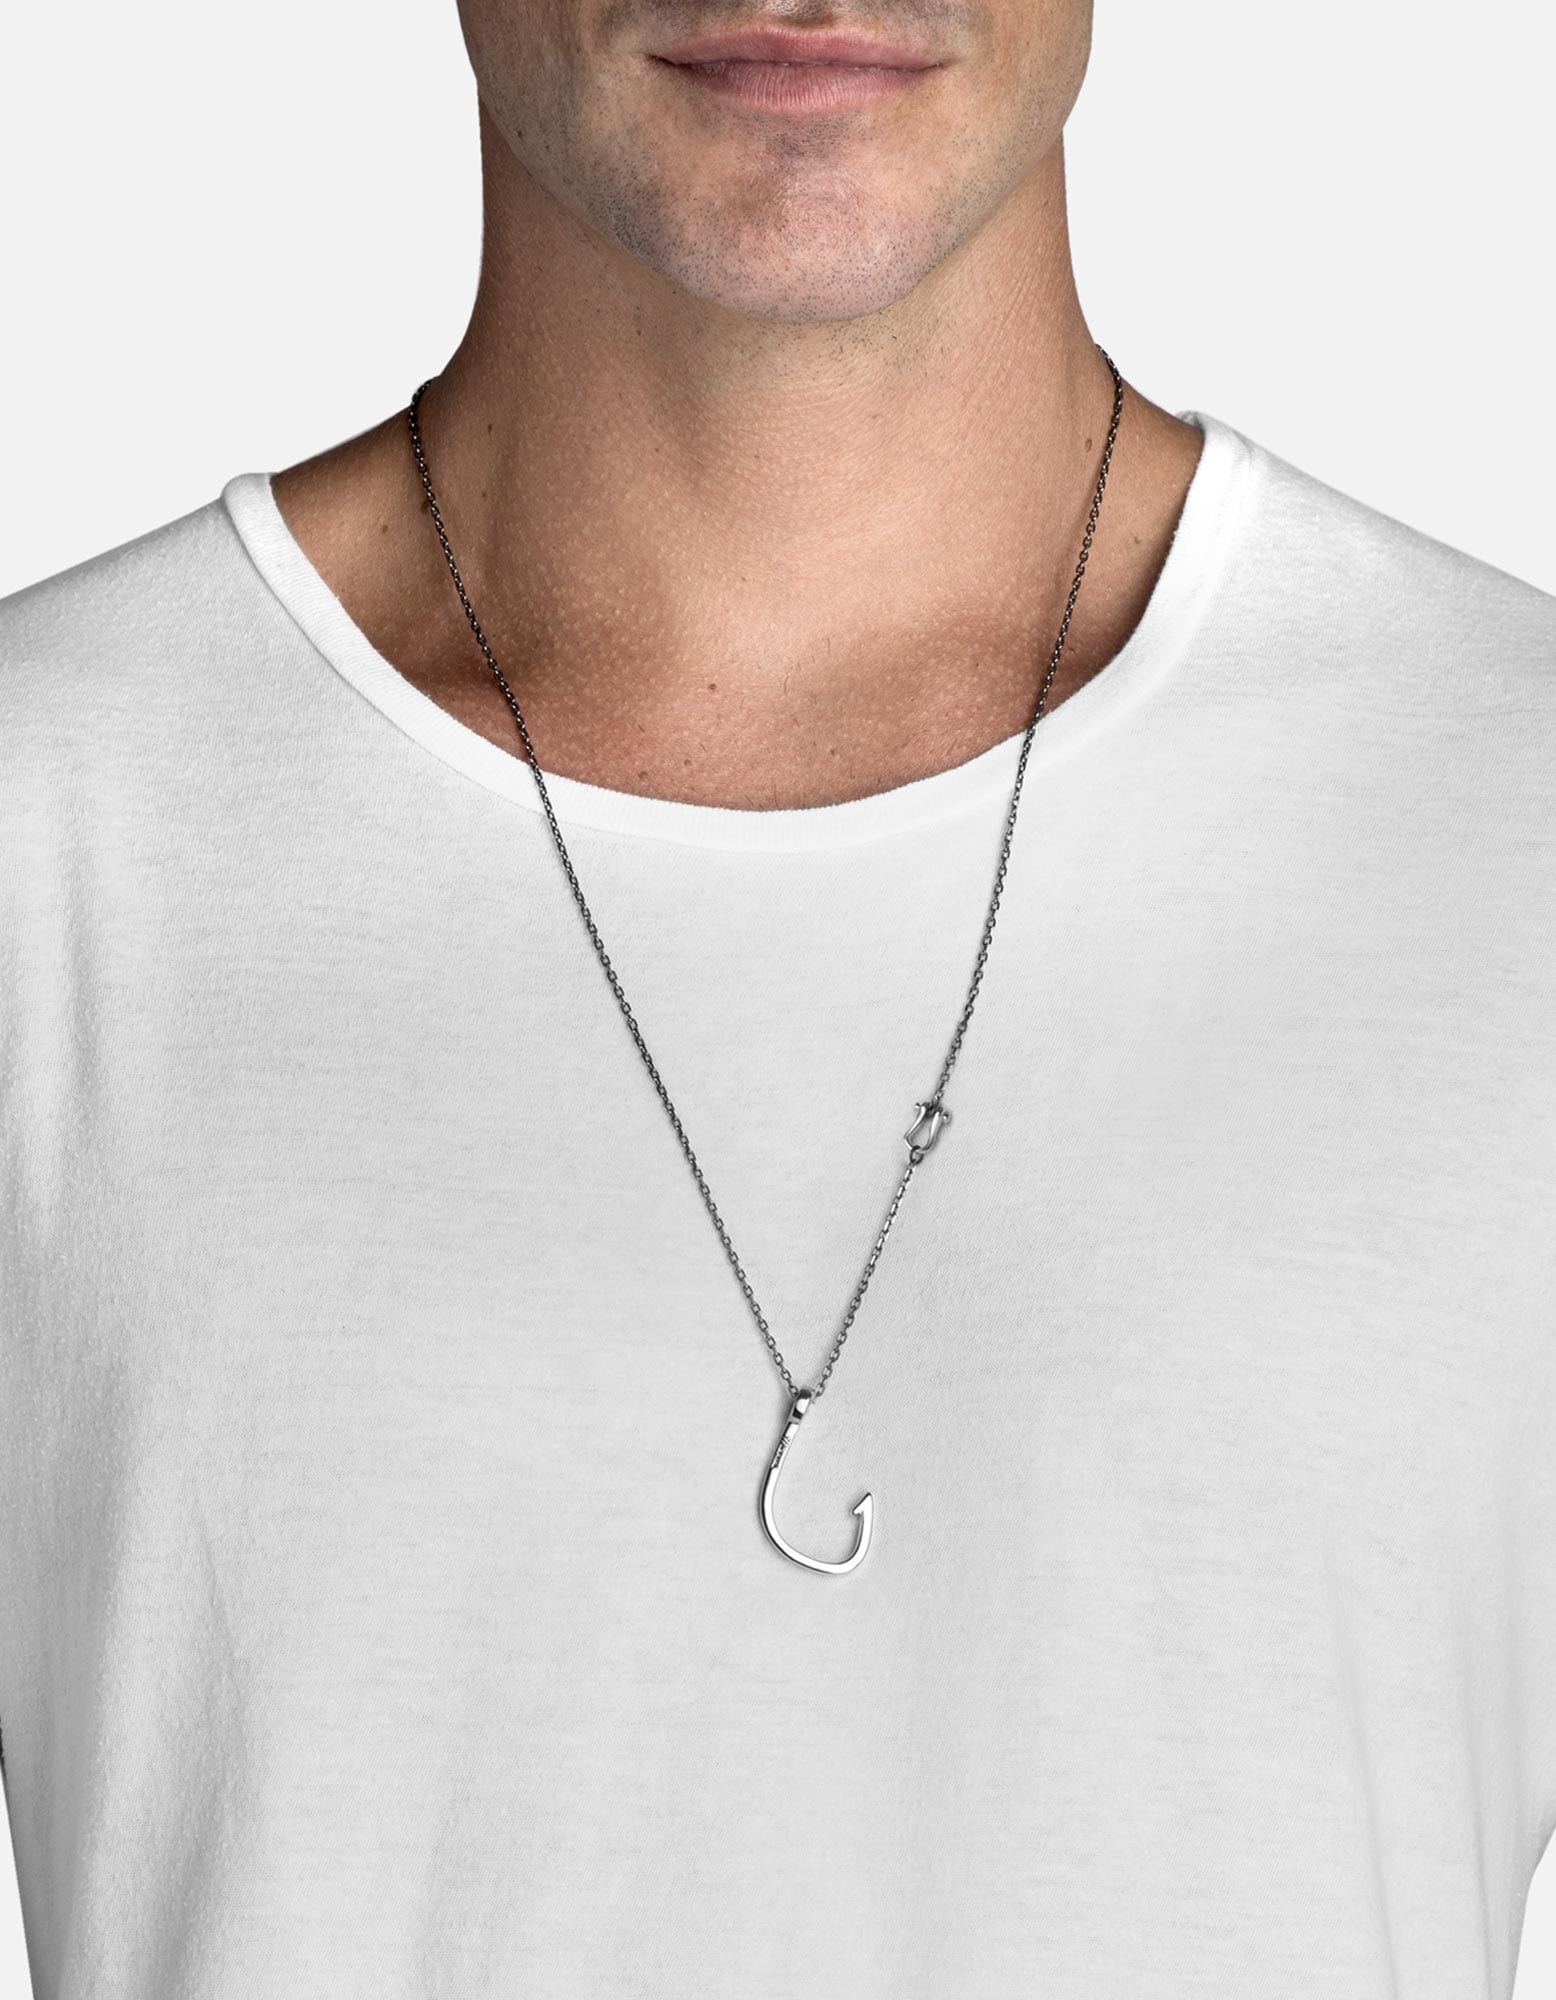 Hooked Necklace